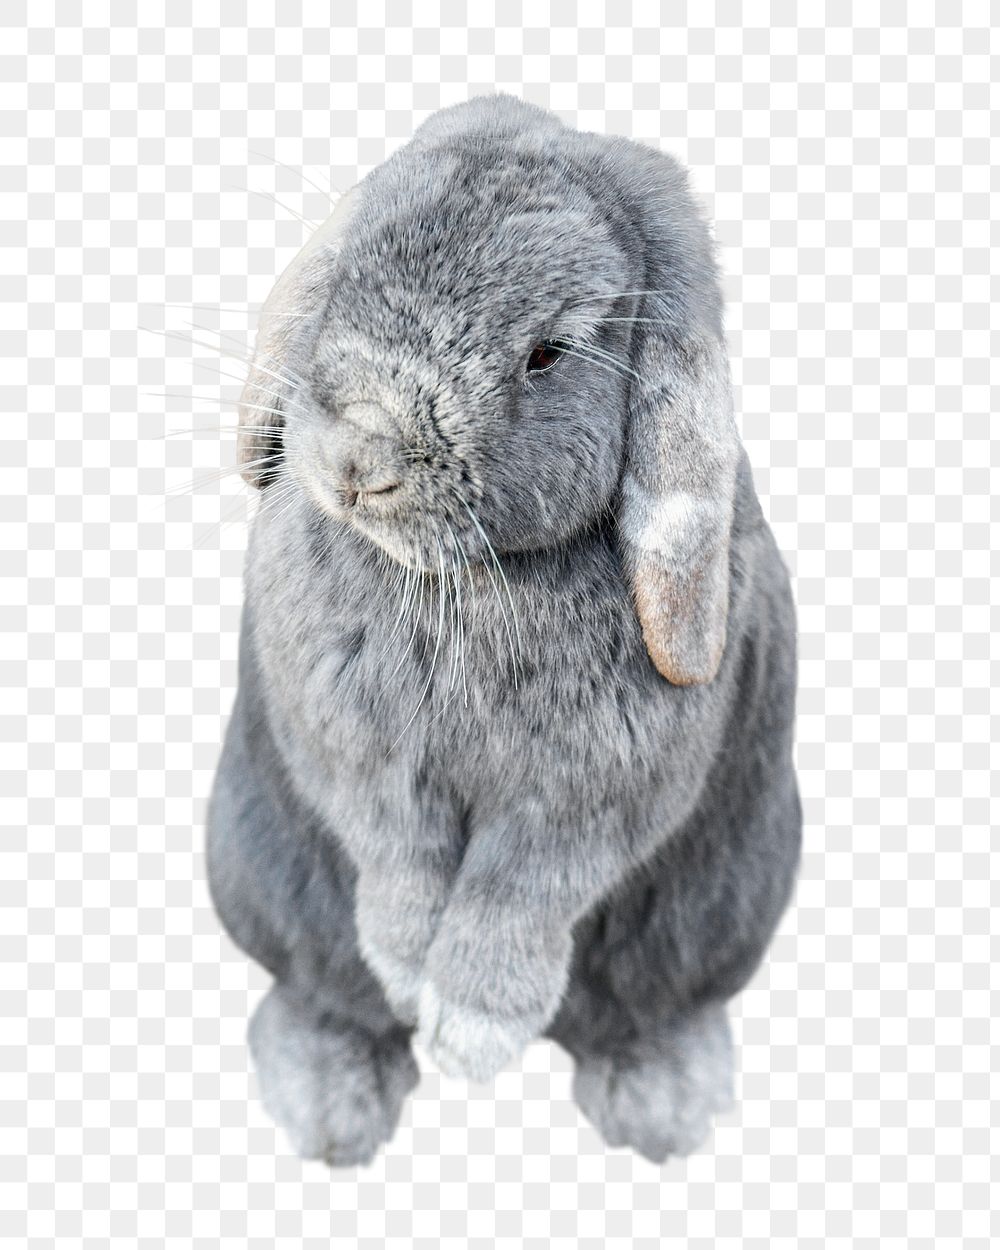 Holland Lop rabbit png sticker, cute bunny, transparent background